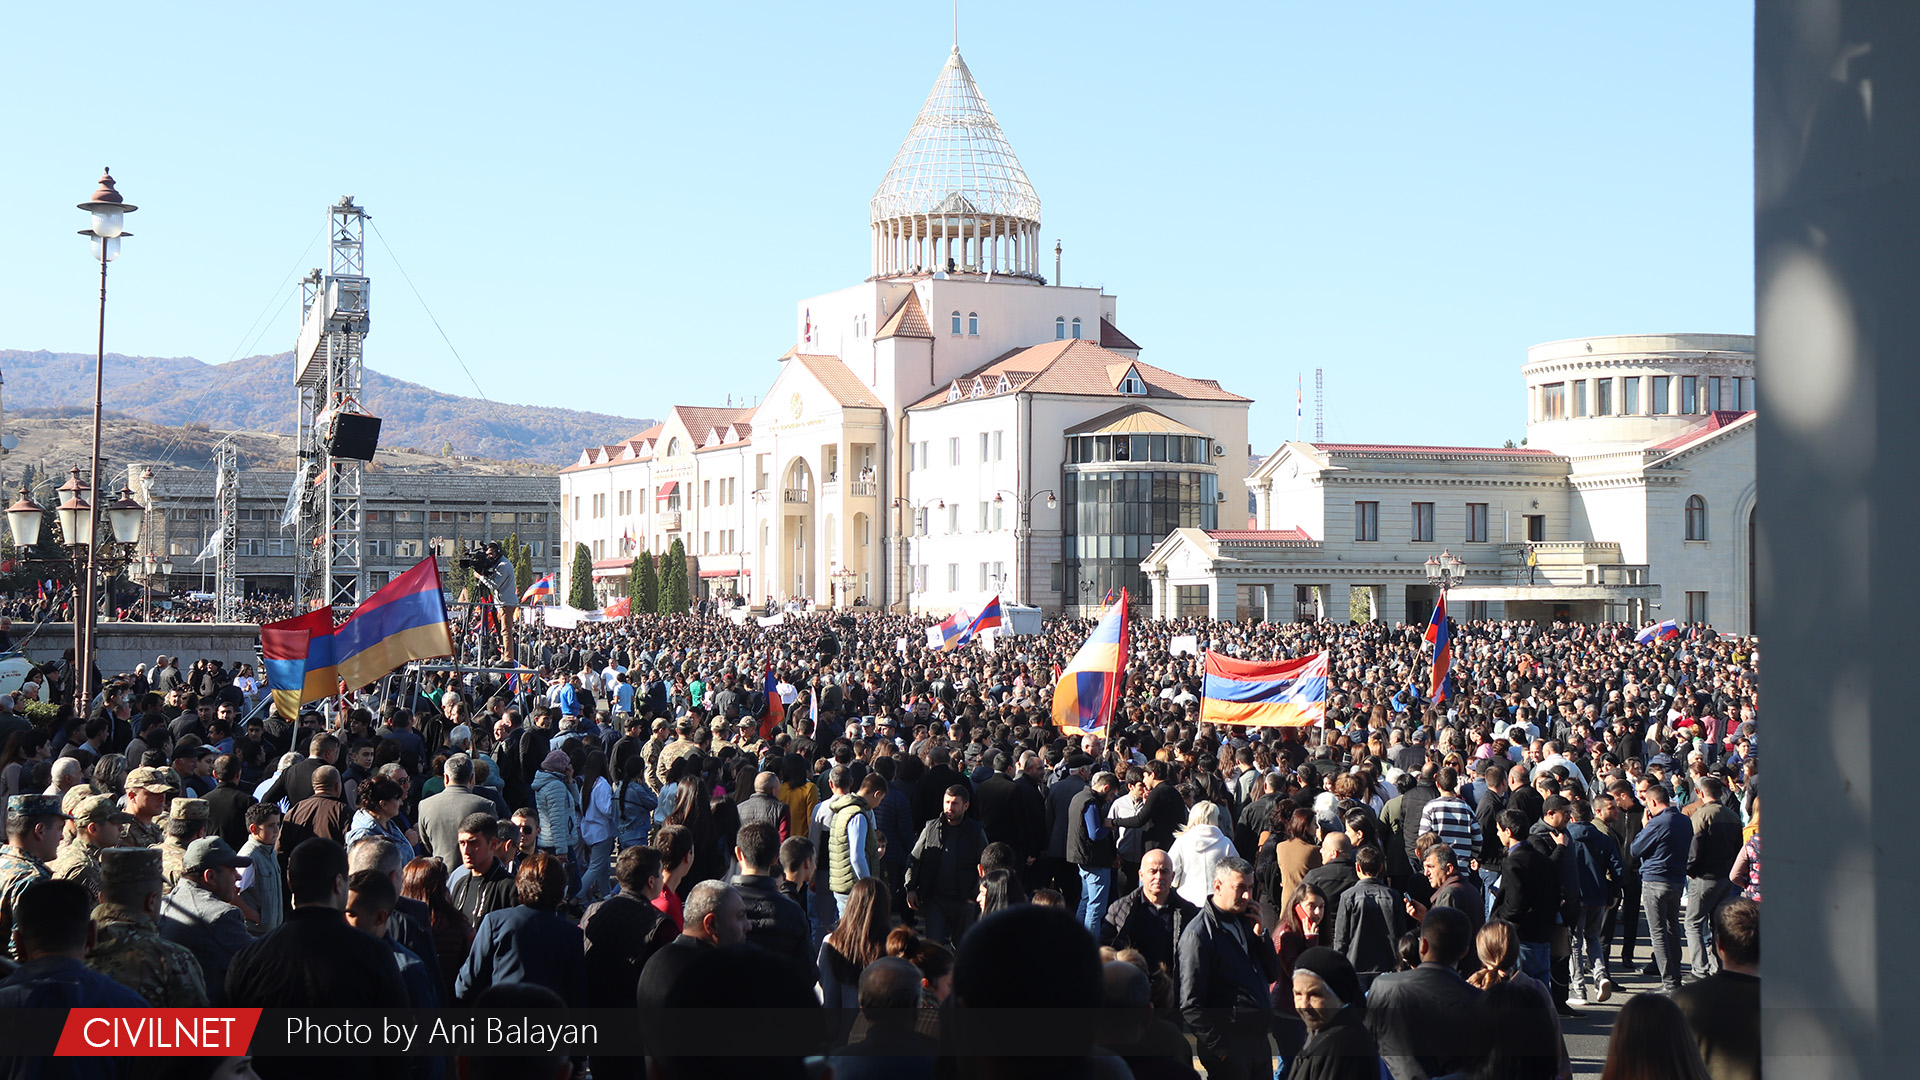 Karabakh residents gather for massive rally as local parliament issues statement rejecting Azerbaijani control